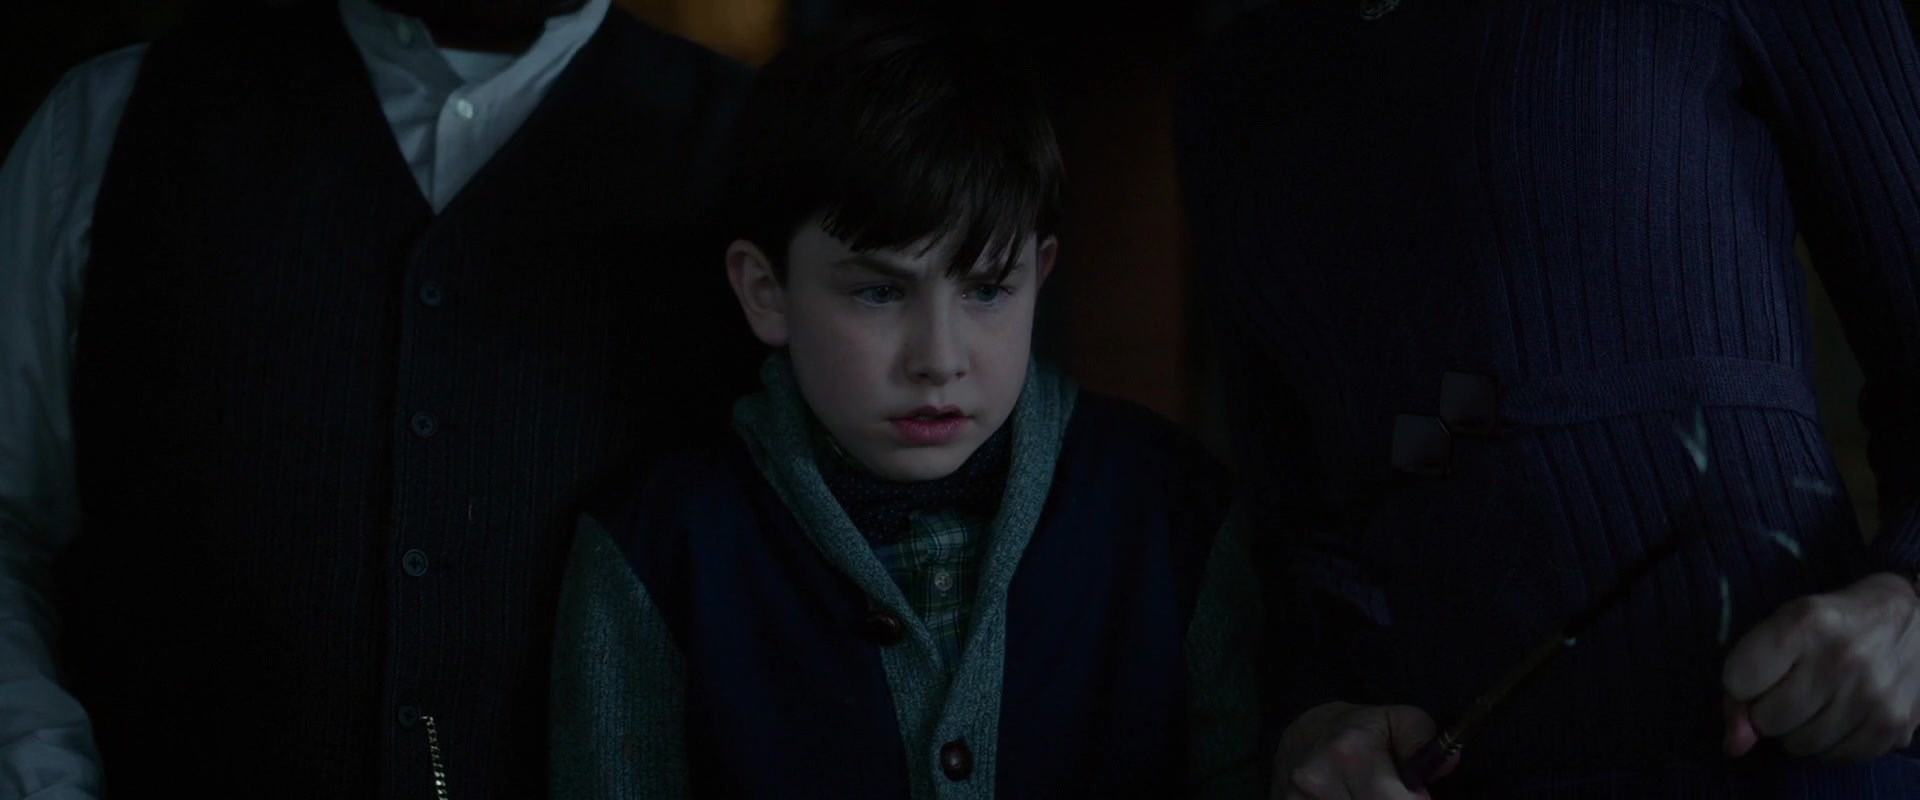 Owen Vaccaro in The House with a Clock in Its Walls